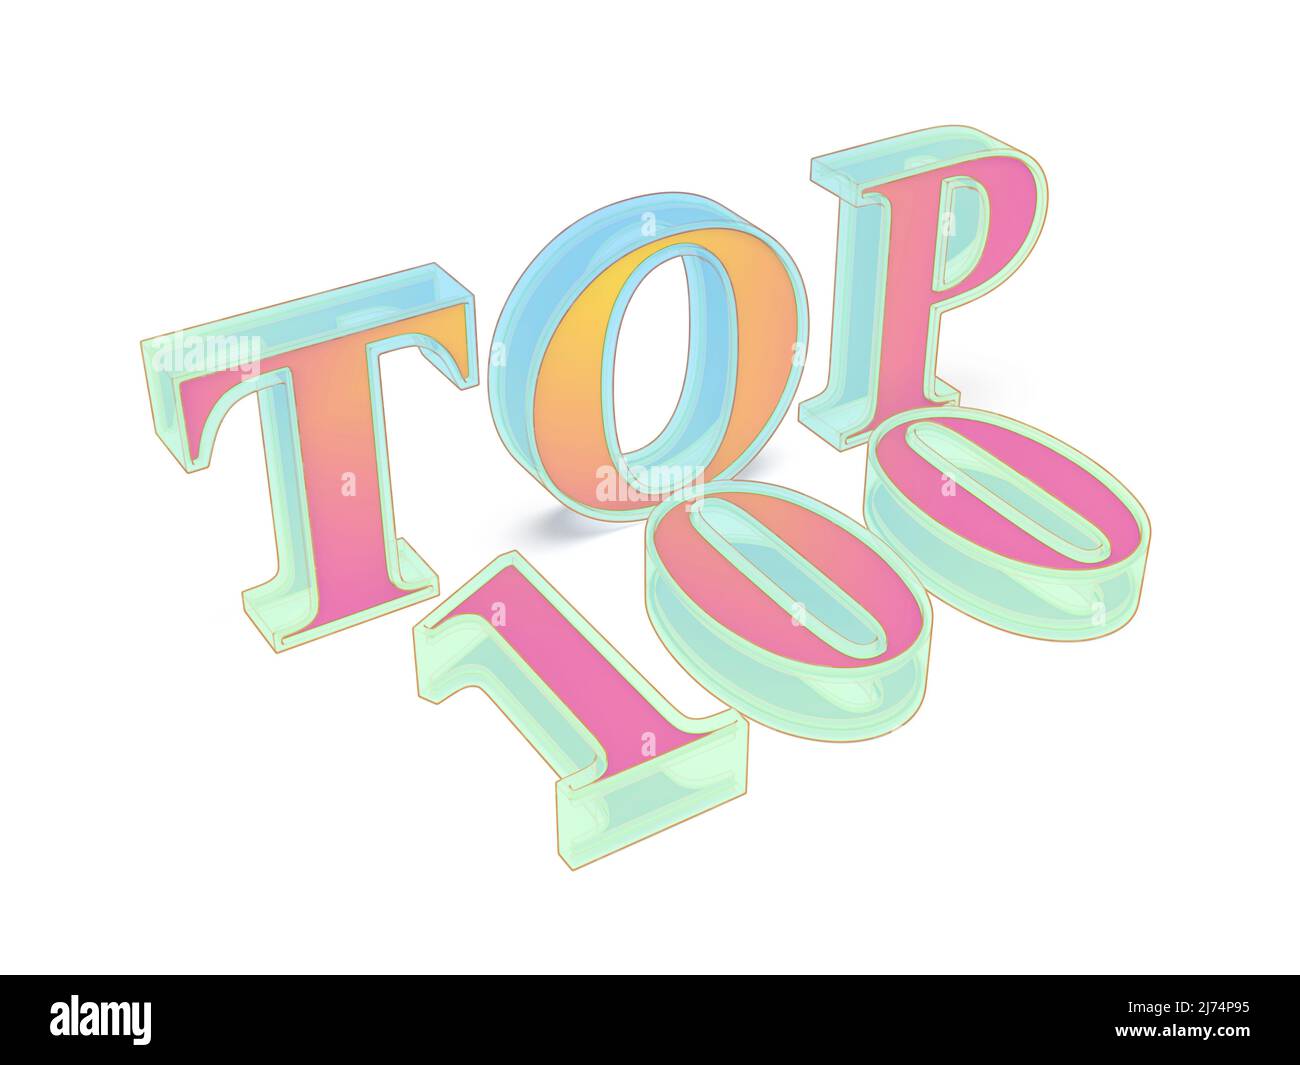 Top 100 text on white background. The best hundred list. Stock Photo